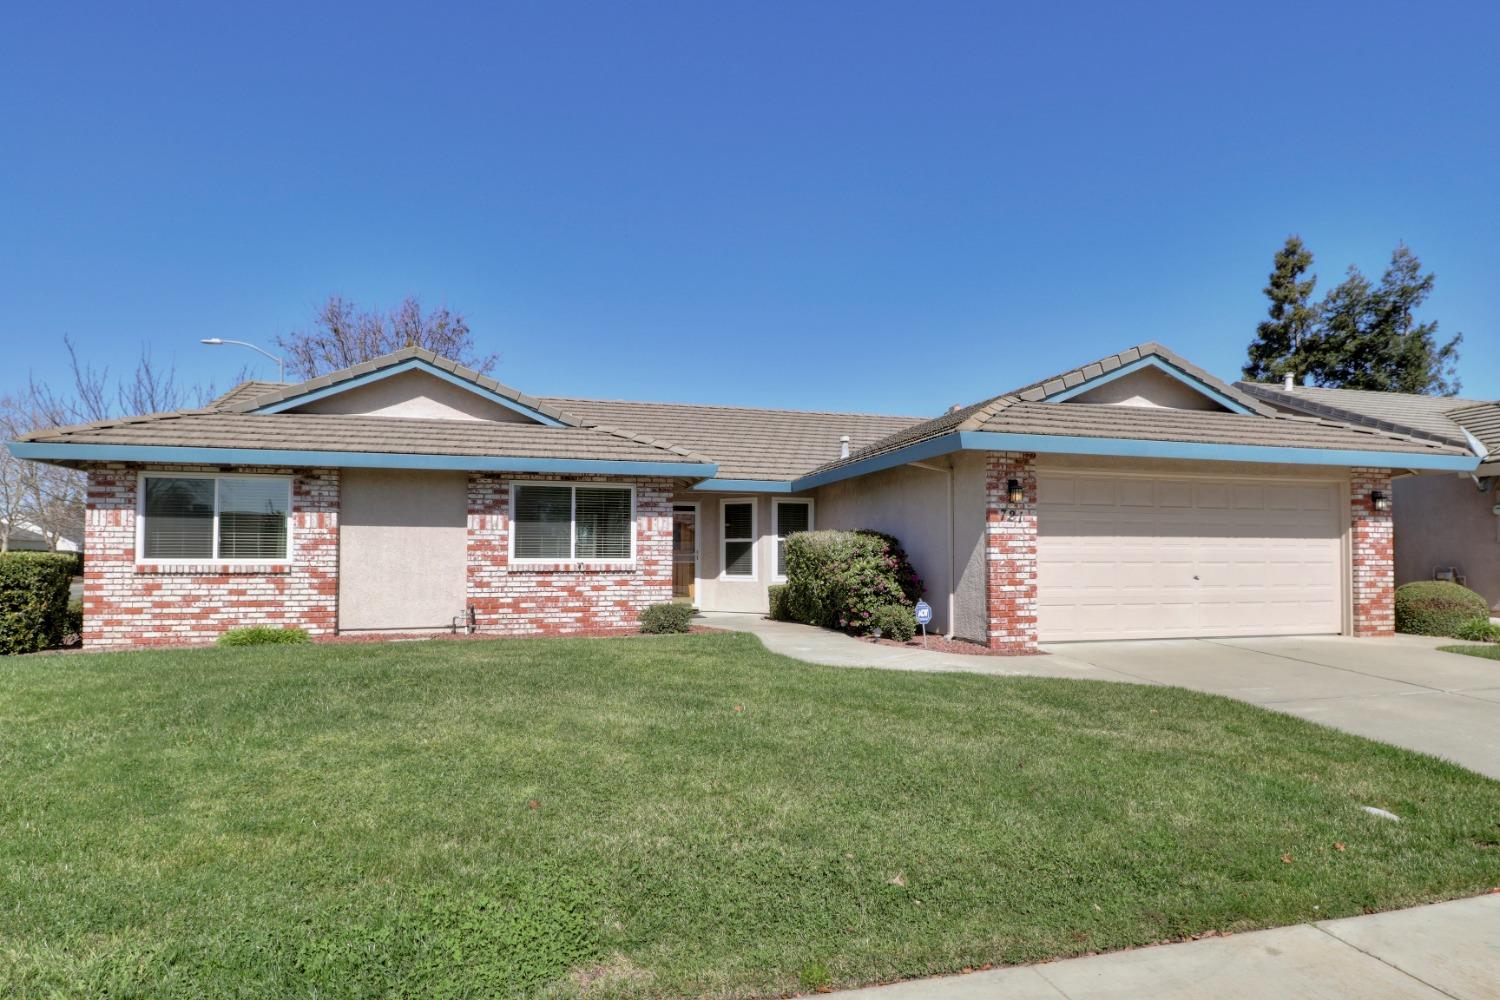 Photo of 721 Lake Canyon Ave in Galt, CA